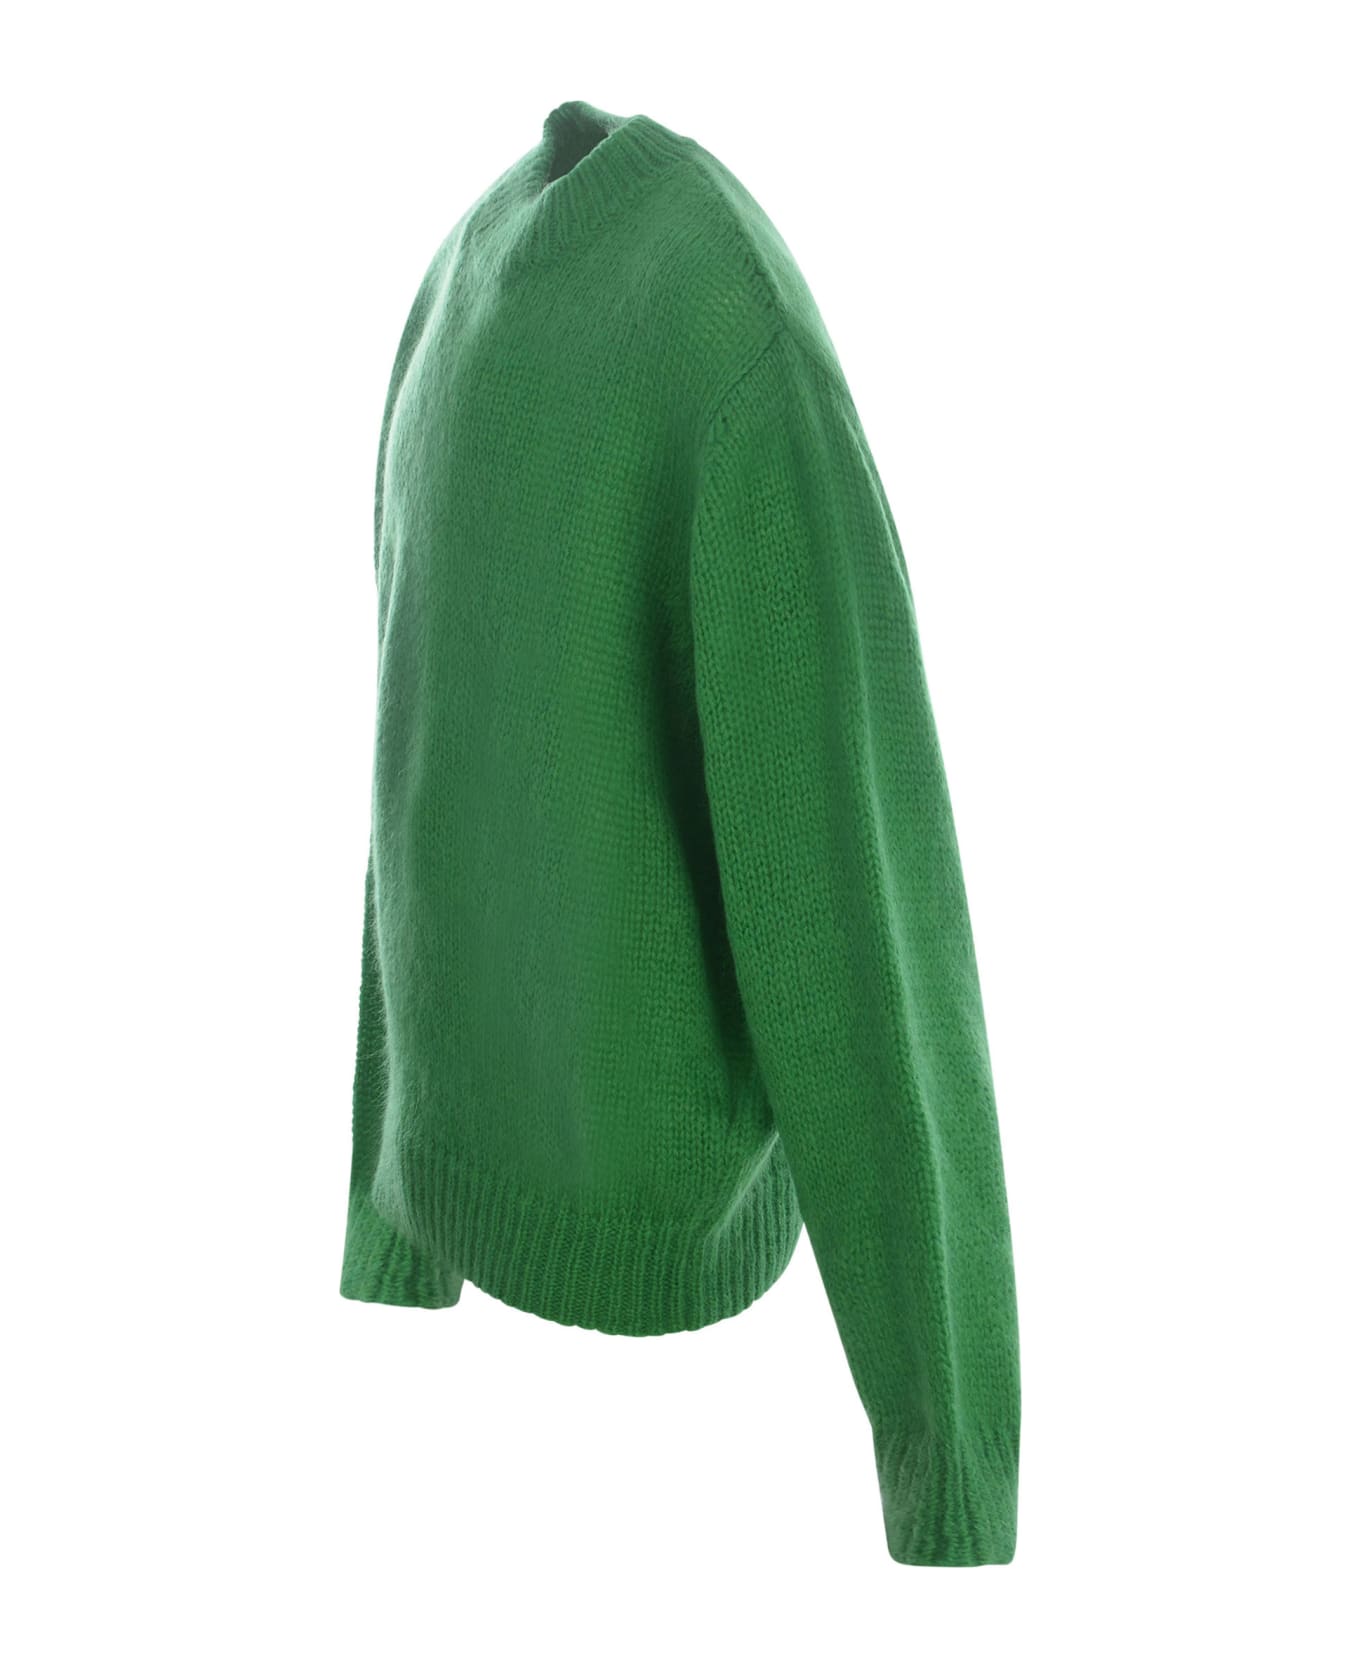 REPRESENT Sweater Represent In Mohair And Wool Blend - Verde ニットウェア